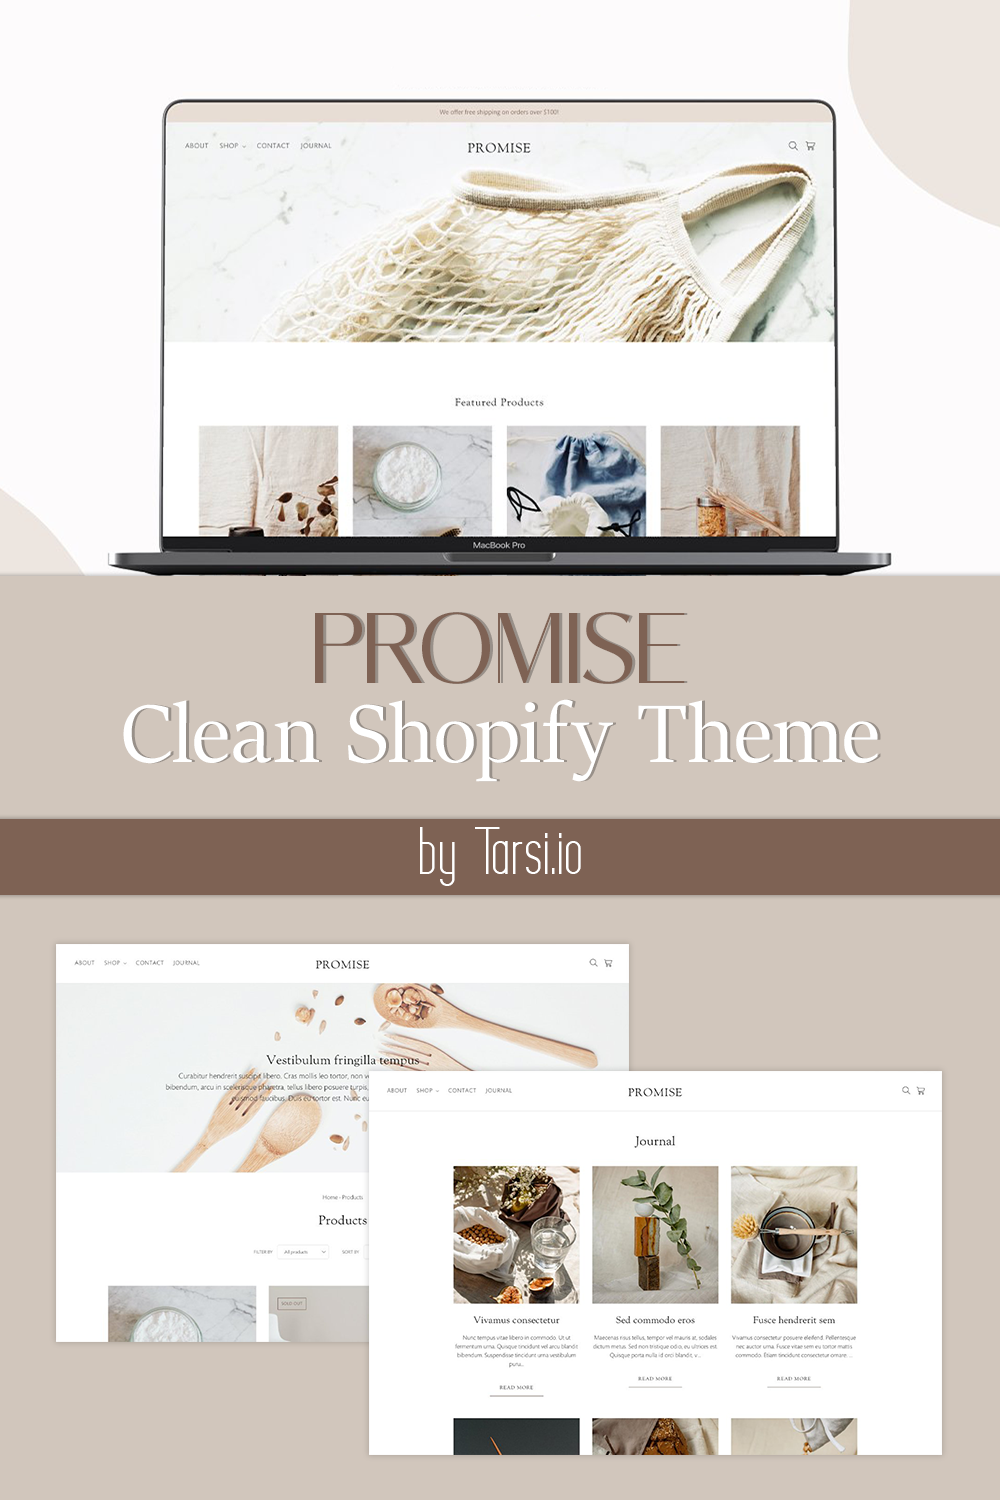 A pack of gorgeous shopify theme images.